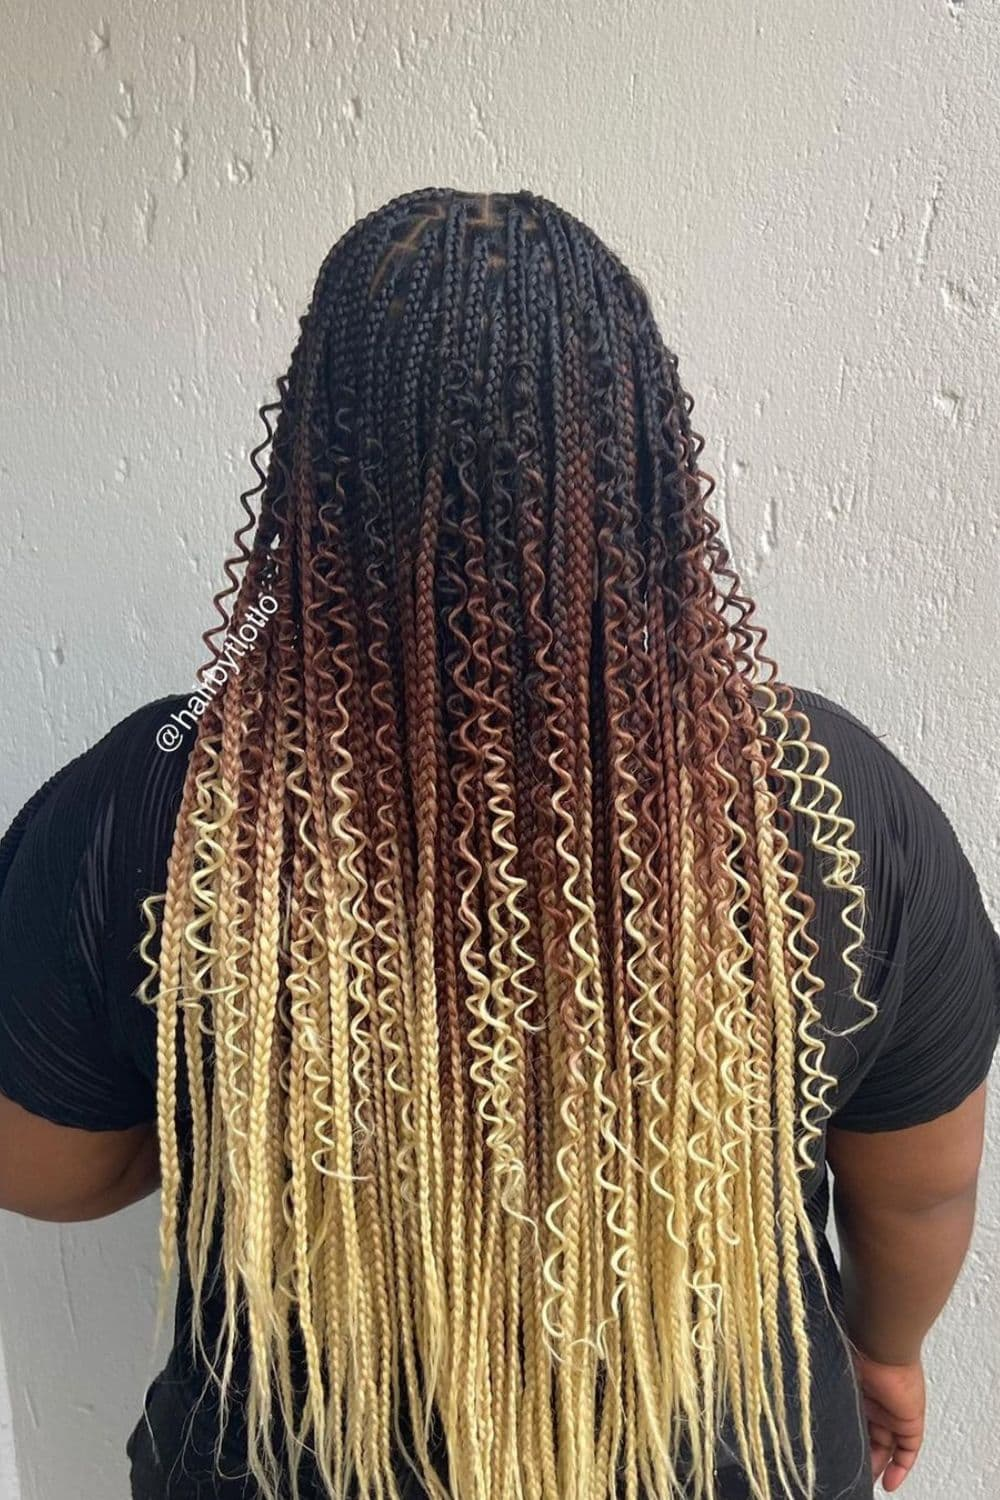 Back view of a lady wearing the blond ombre goddess braids